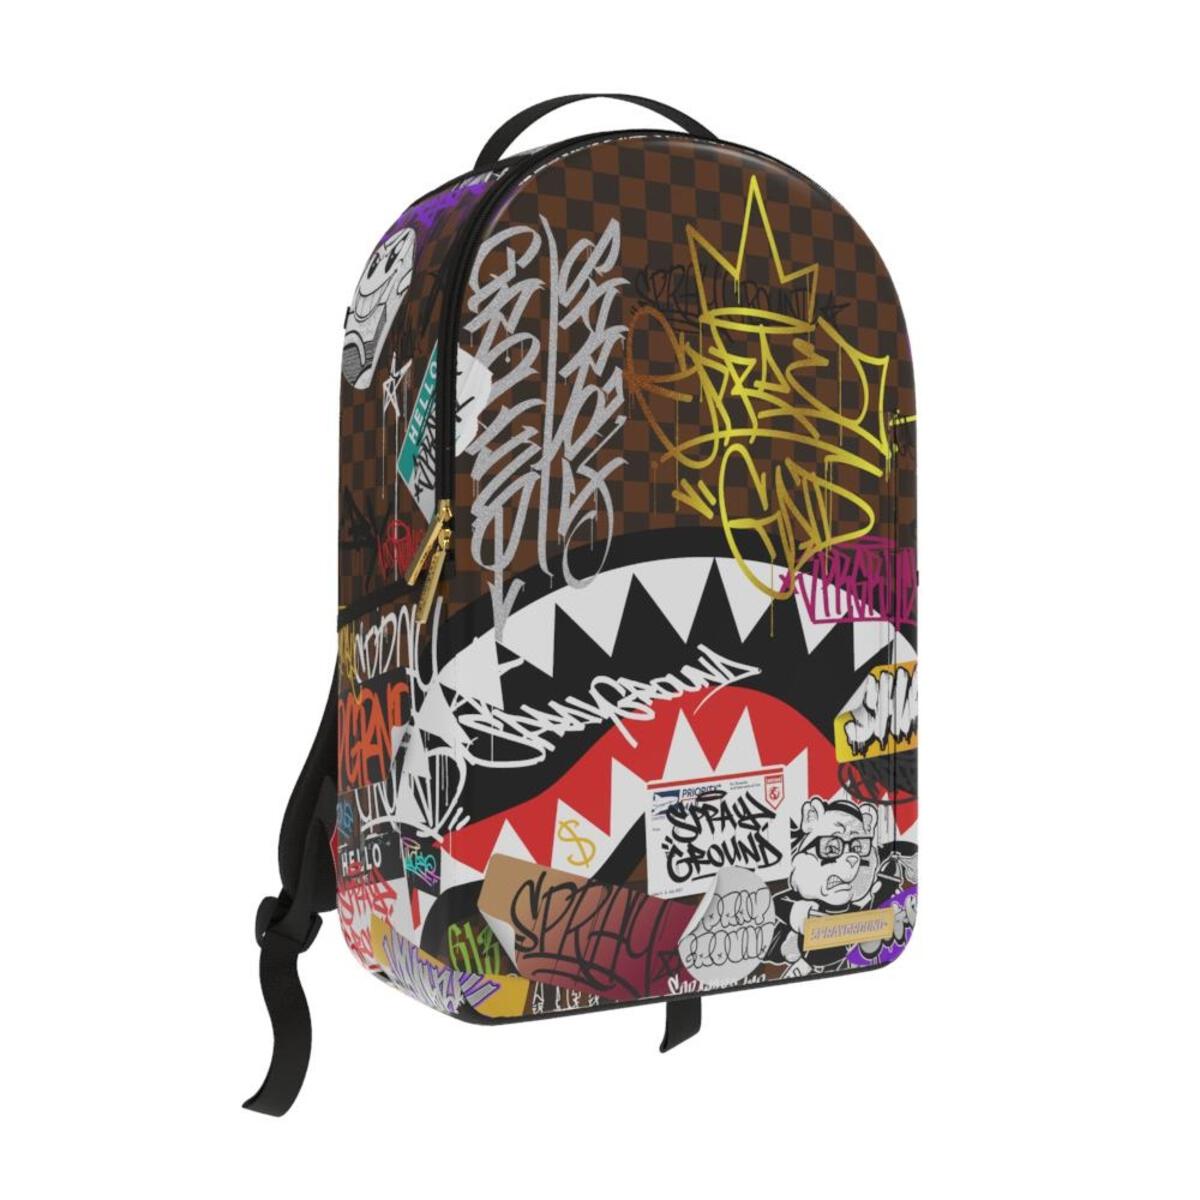 Tagged Up Shark In Pairs Backpack